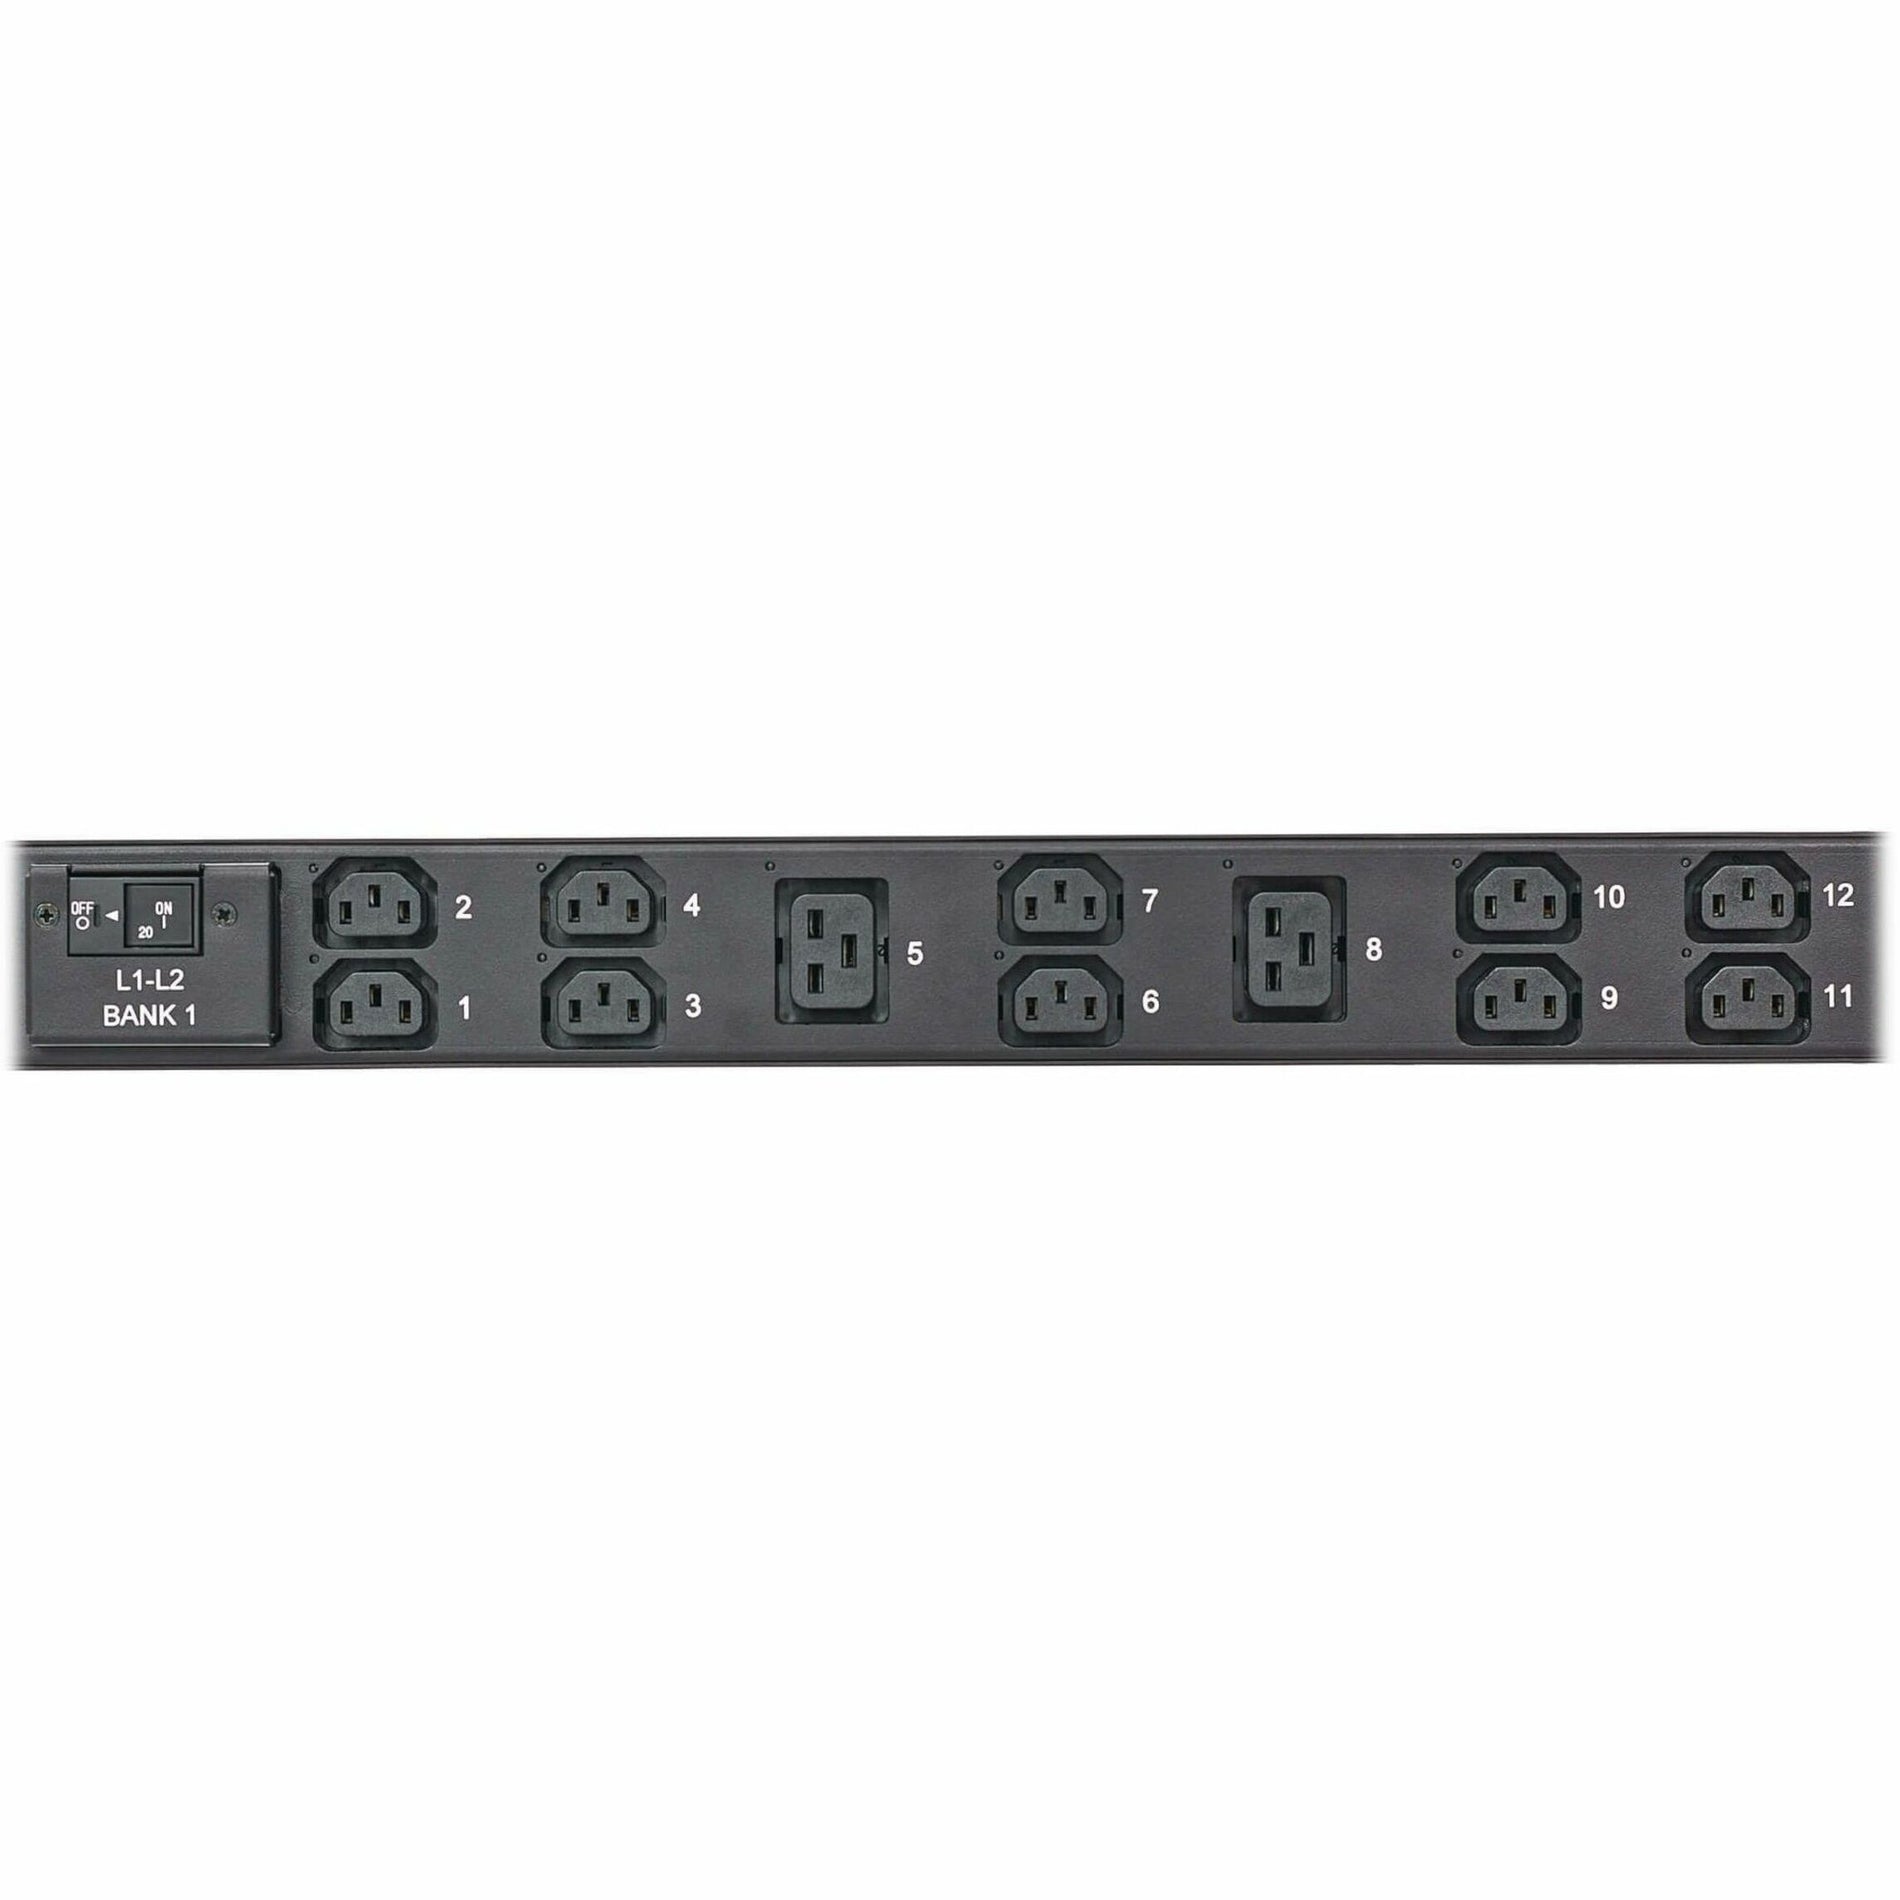 Tripp Lite PDU3EVSR1H50 36-Outlets PDU, 12.60 kW Power Rating, Managed, Switched, Overload Protection